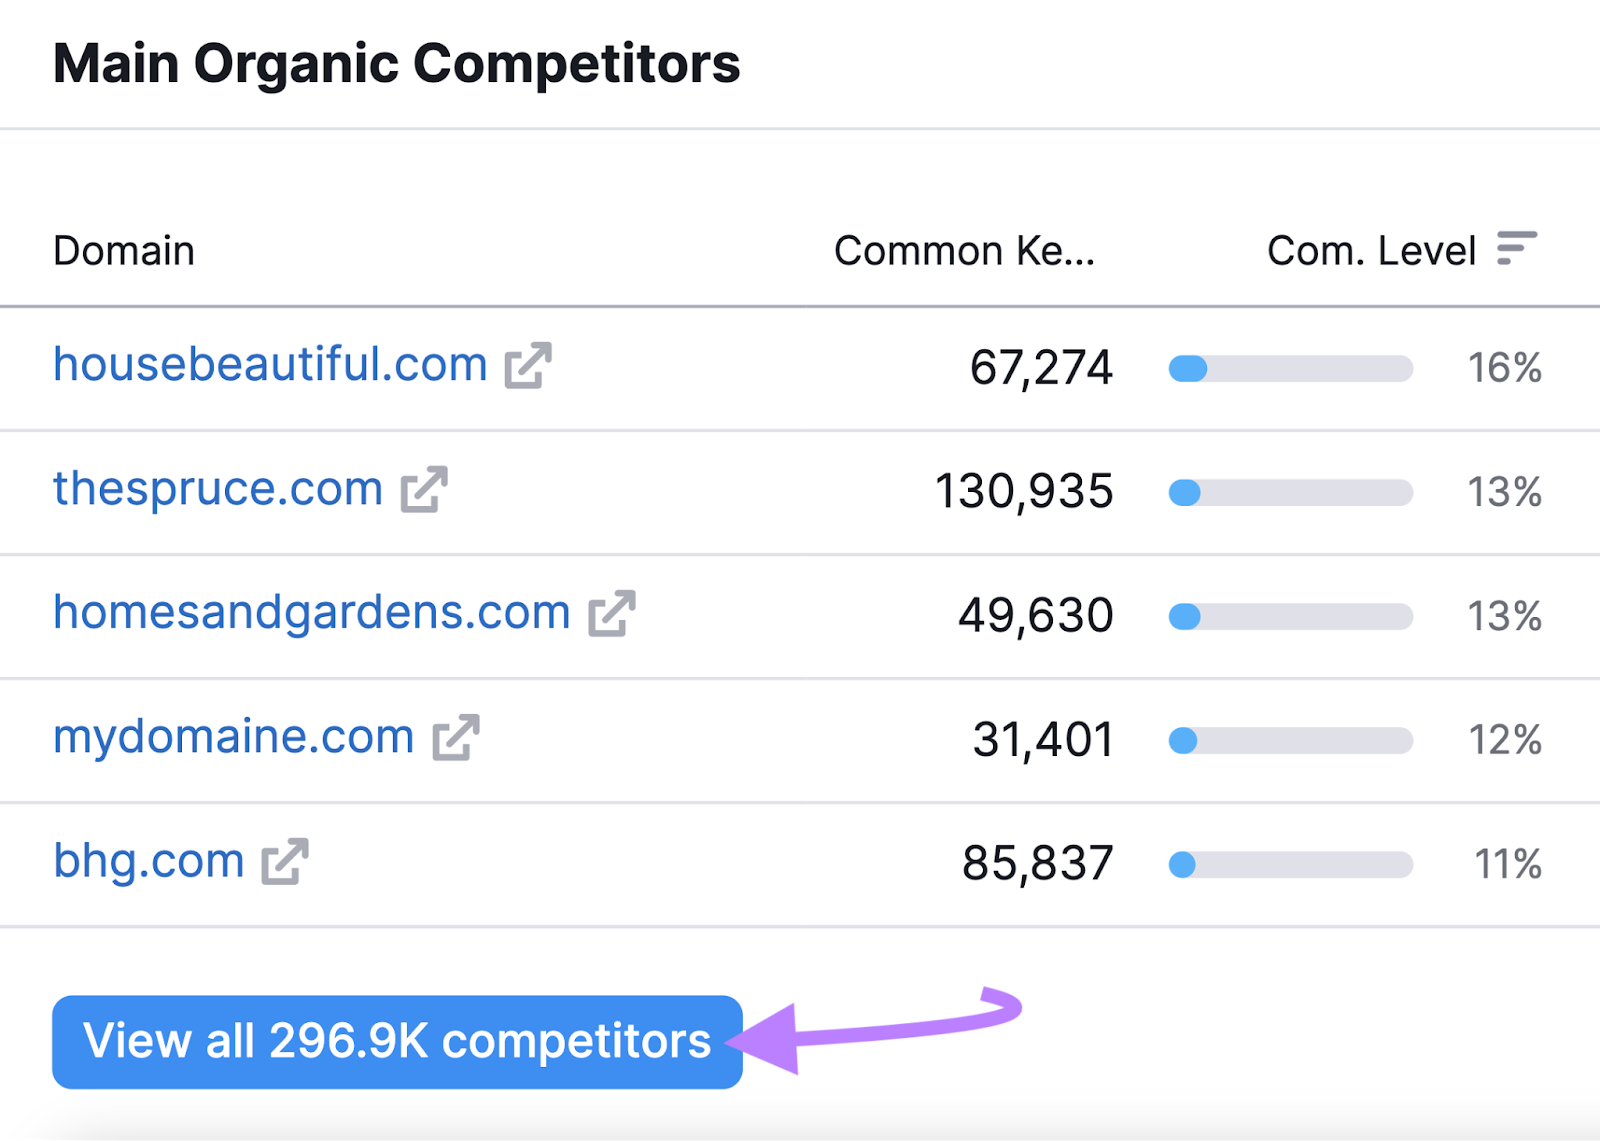 "View all 296.9K competitors" button selected under "Main Organic Competitors" section